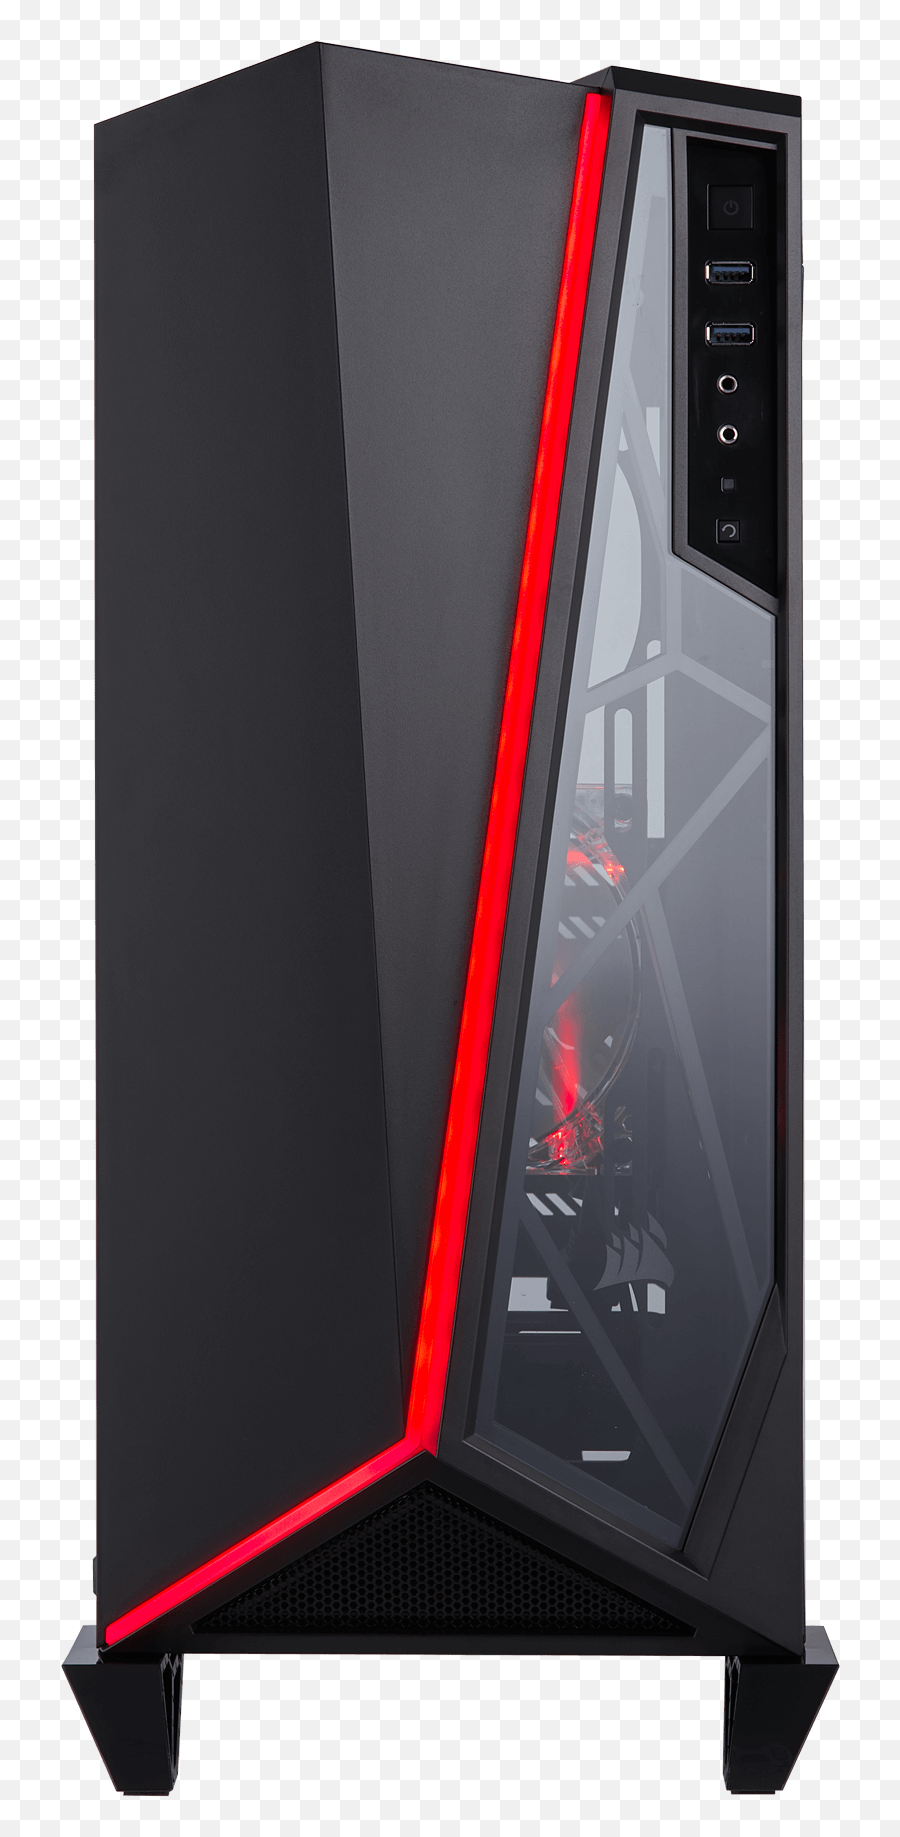 The Carbide Series Spec - Omega Is A Midtower Pc Case With Emoji,Transparent Cpu Case